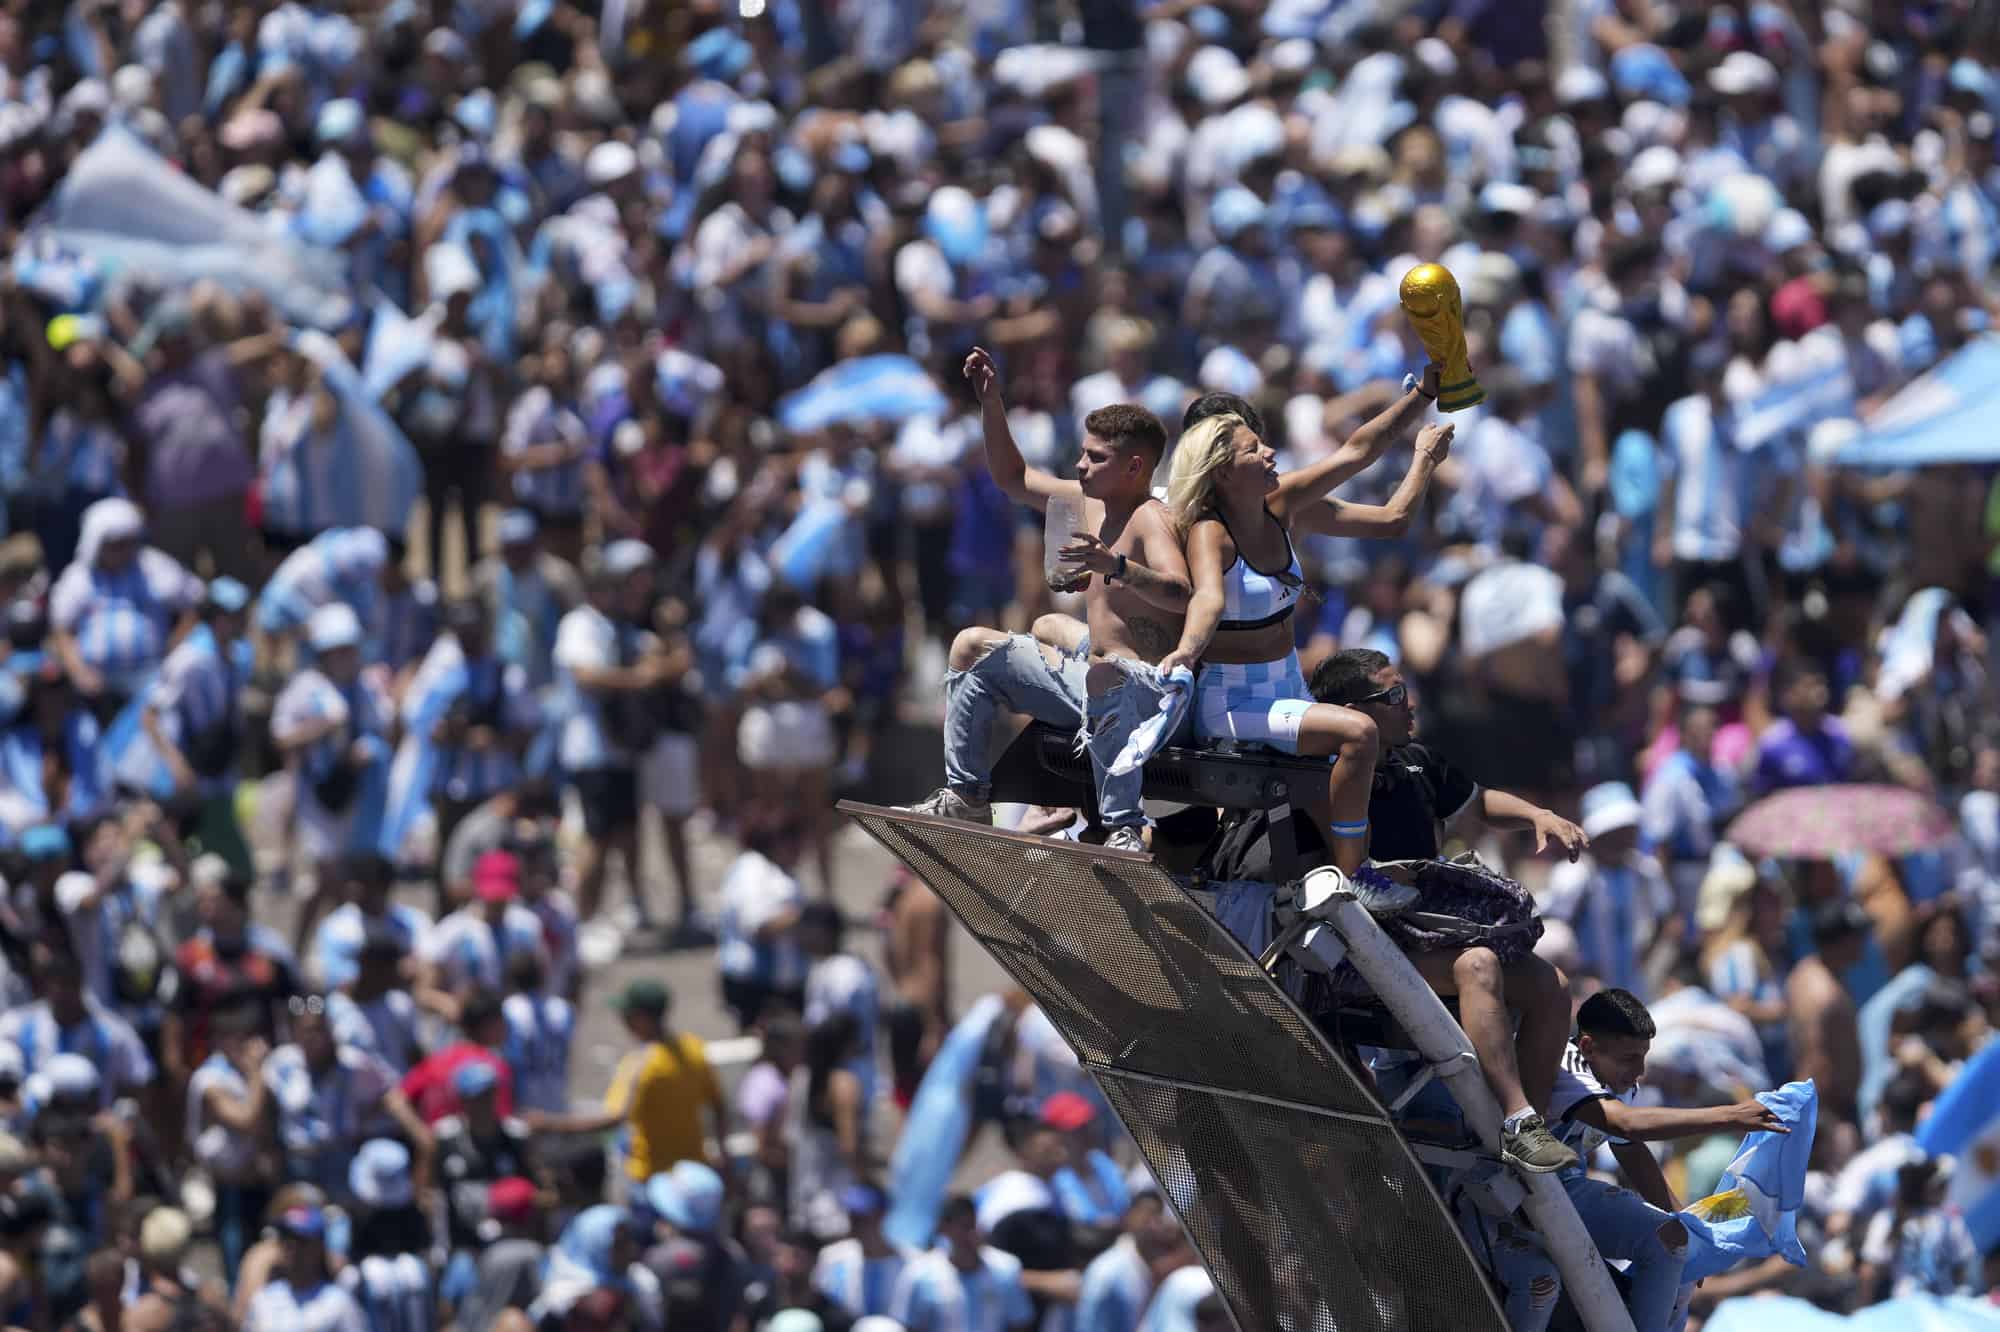 Soccer fans welcome home the Argentine soccer team after it won the World Cup title, in Buenos Aires, Argentina, Tuesday, Dec. 20, 2022.